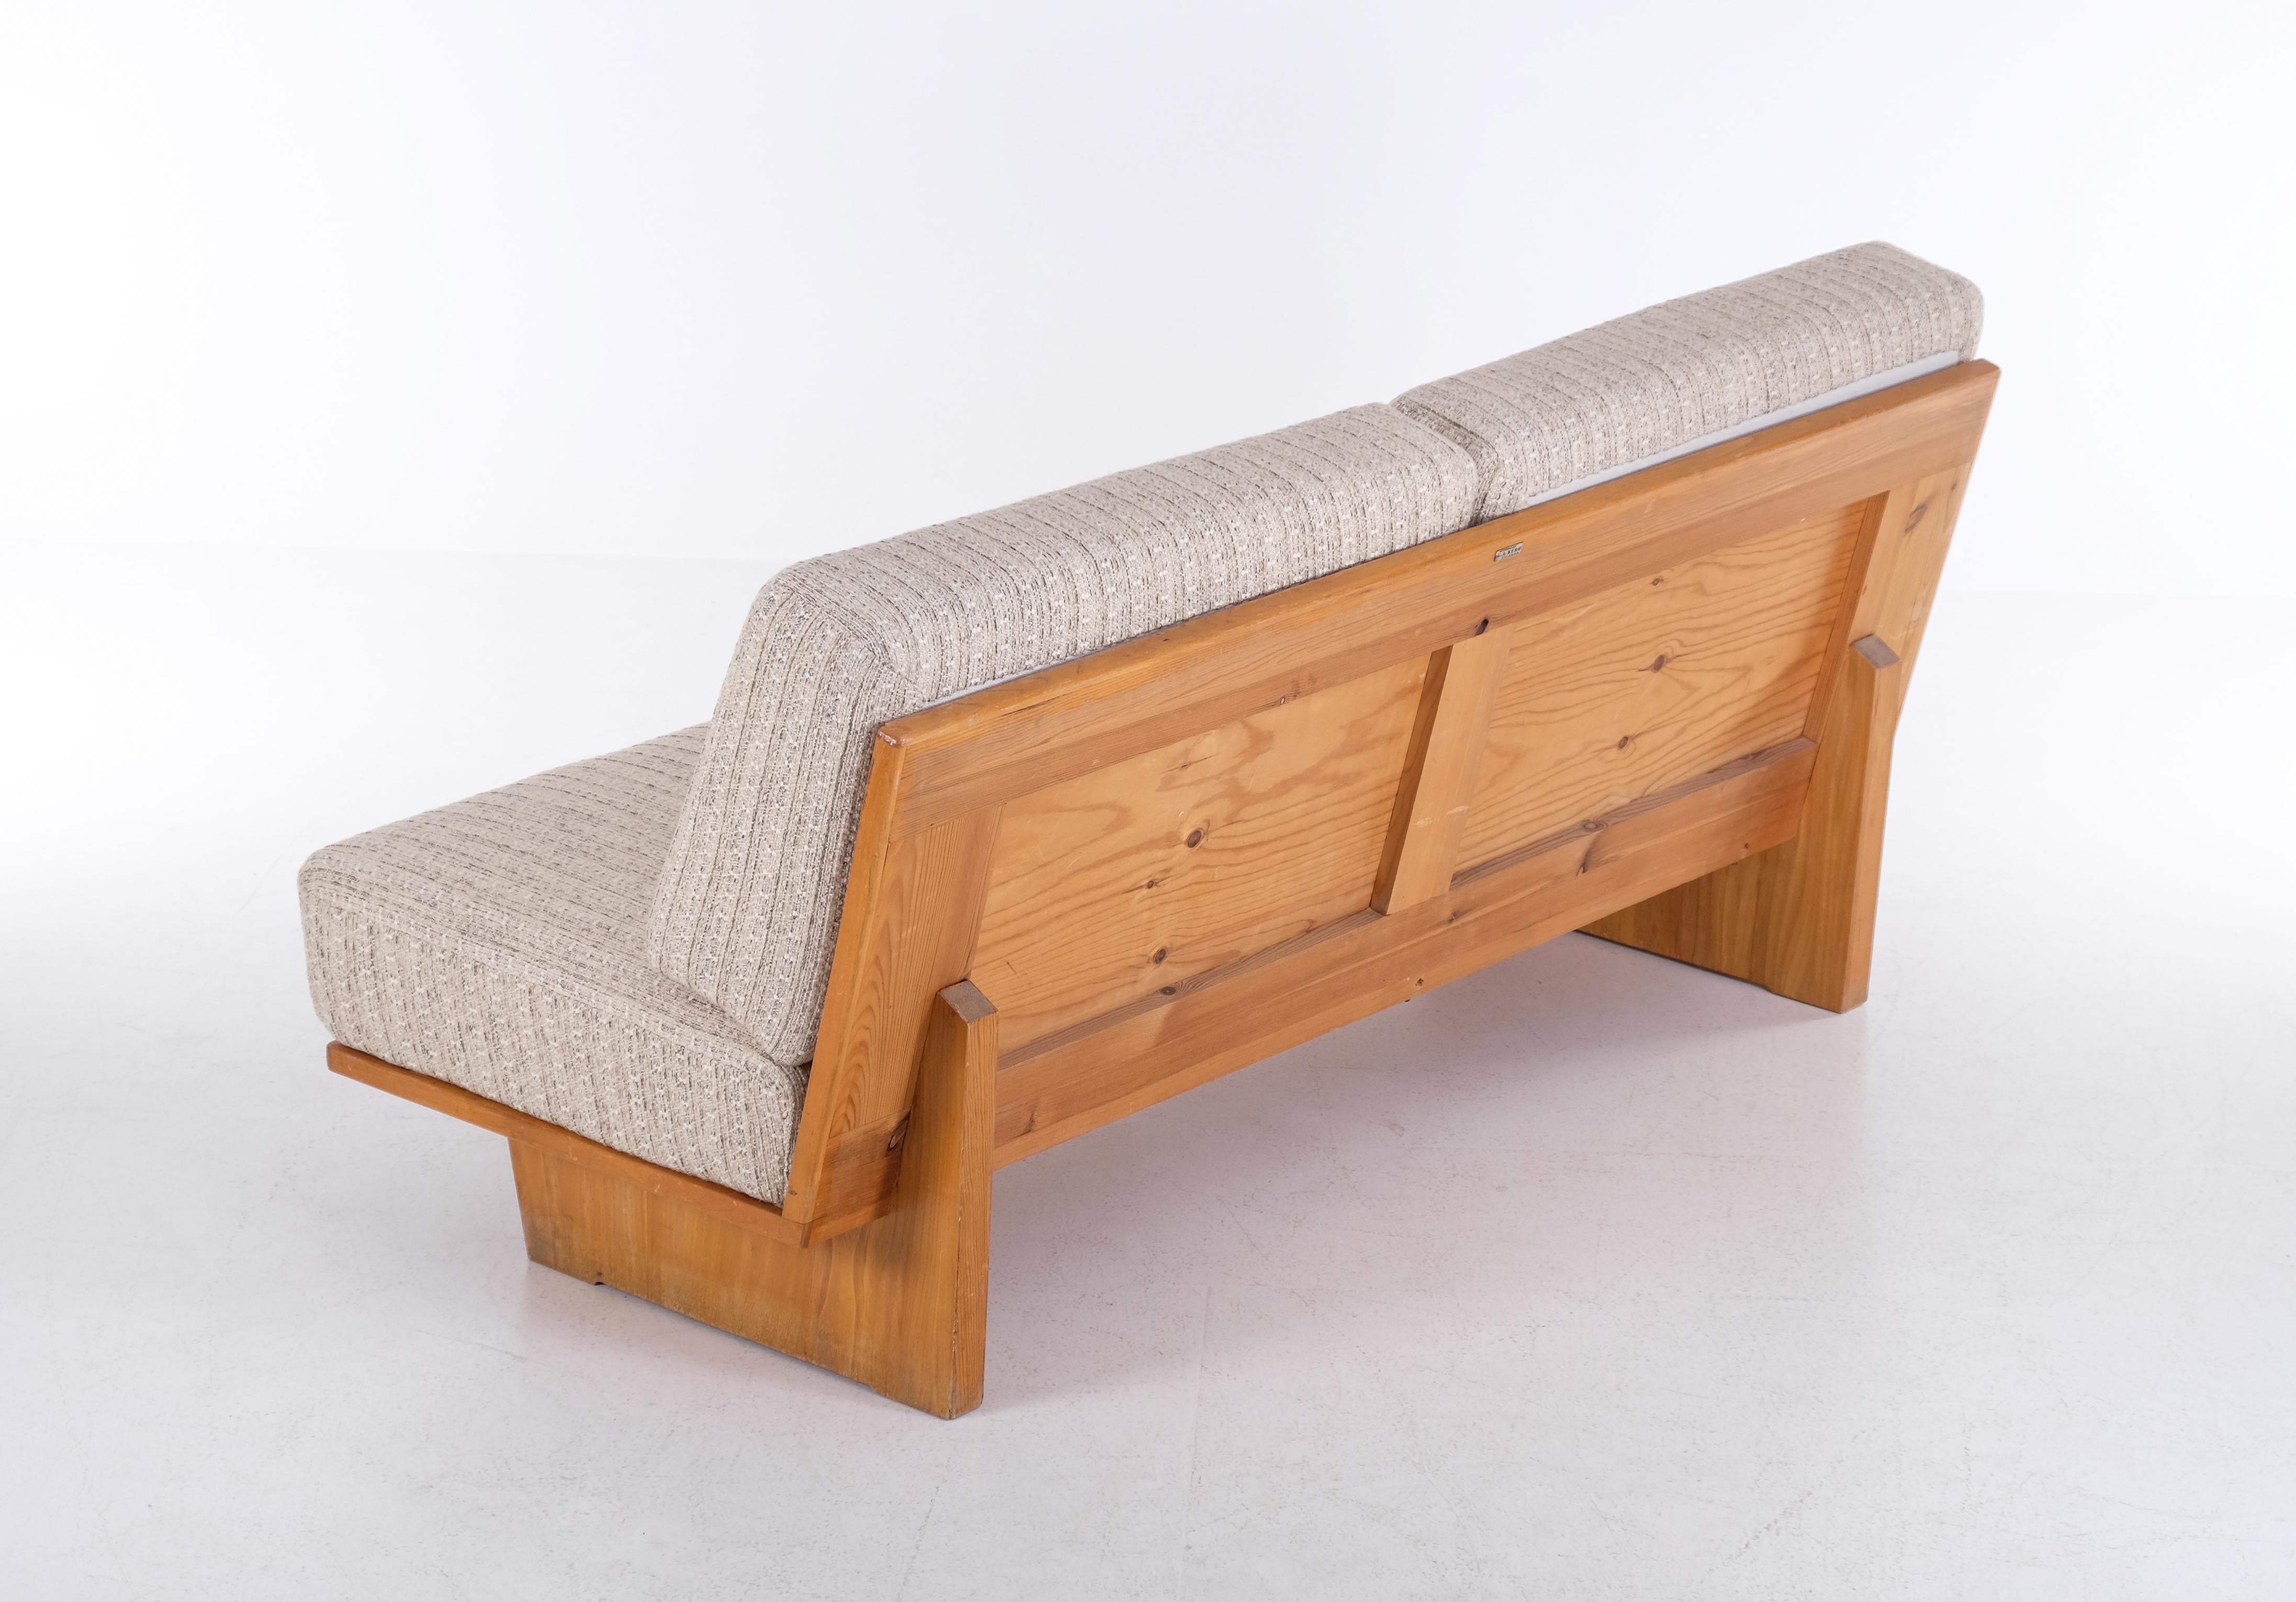 Rare Swedish pine sofa produced by Gustav-Axel Berg, Sweden, 1950s.
Newly upholstered cushions.